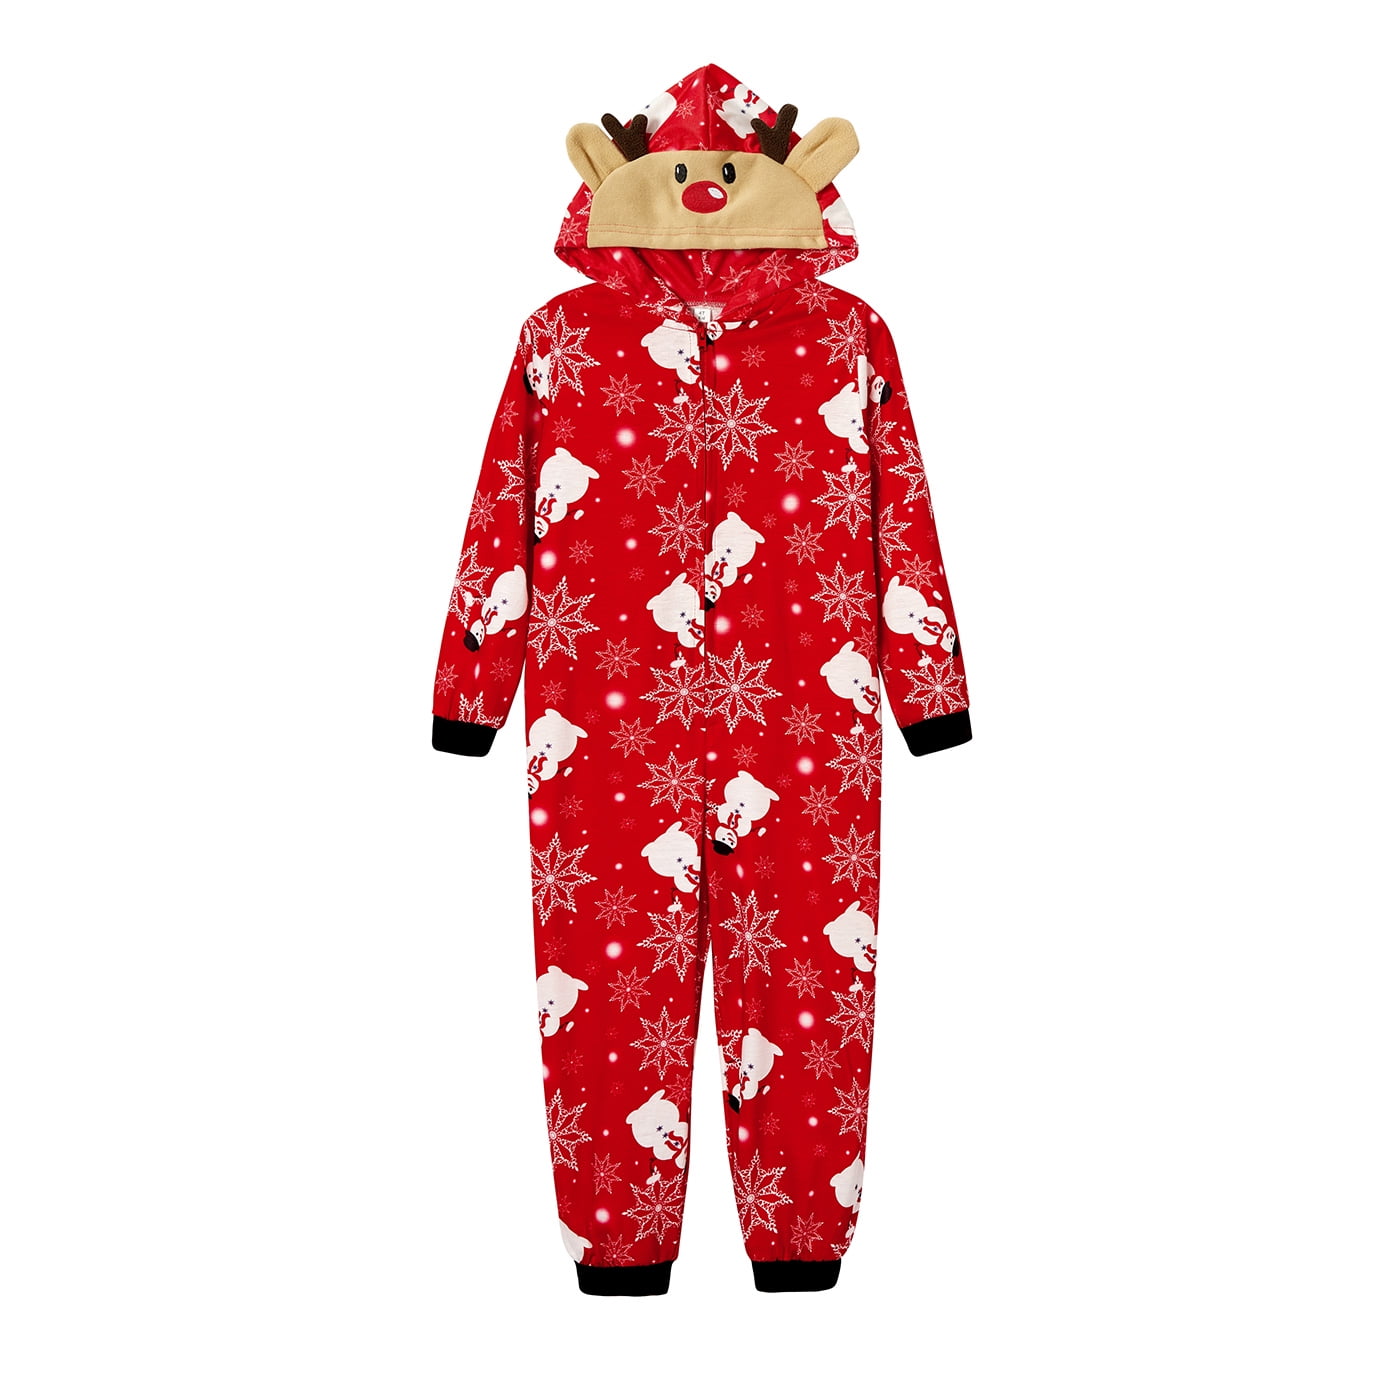 PatPat Reindeer Christmas Family Matching Pajama for Family,Size Baby-Kids-Adult ,Onesie,Unisex